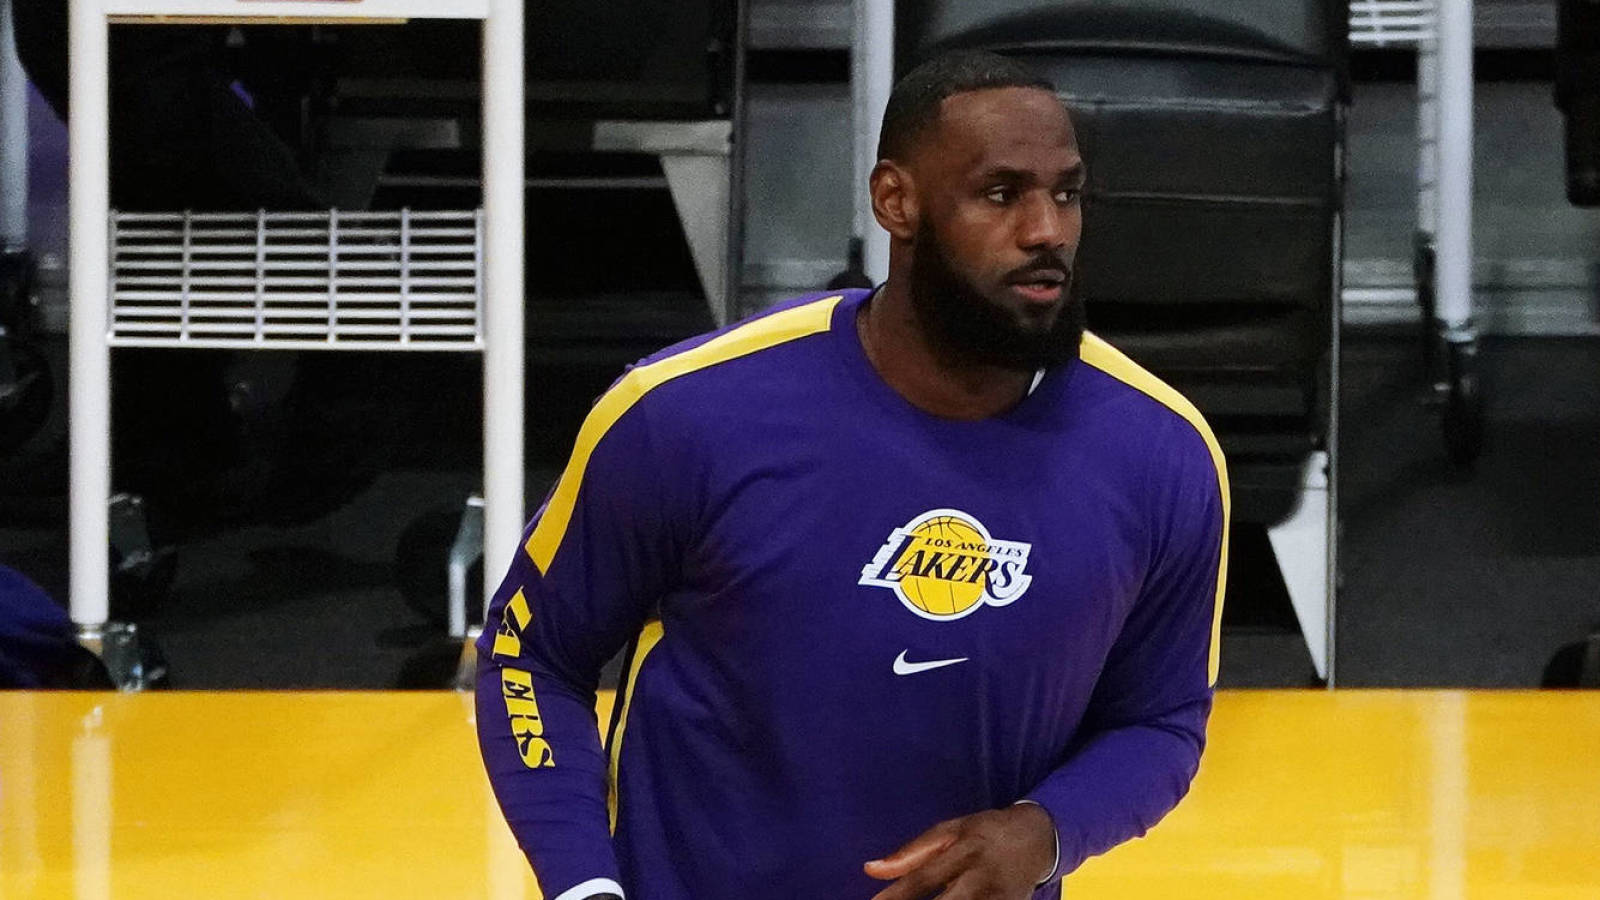 May 2, 2021; Los Angeles, California, USA; Los Angeles Lakers forward LeBron James (23) before playing against the Toronto Raptors at Staples Center. Mandatory Credit: Gary A. Vasquez-USA TODAY Sports